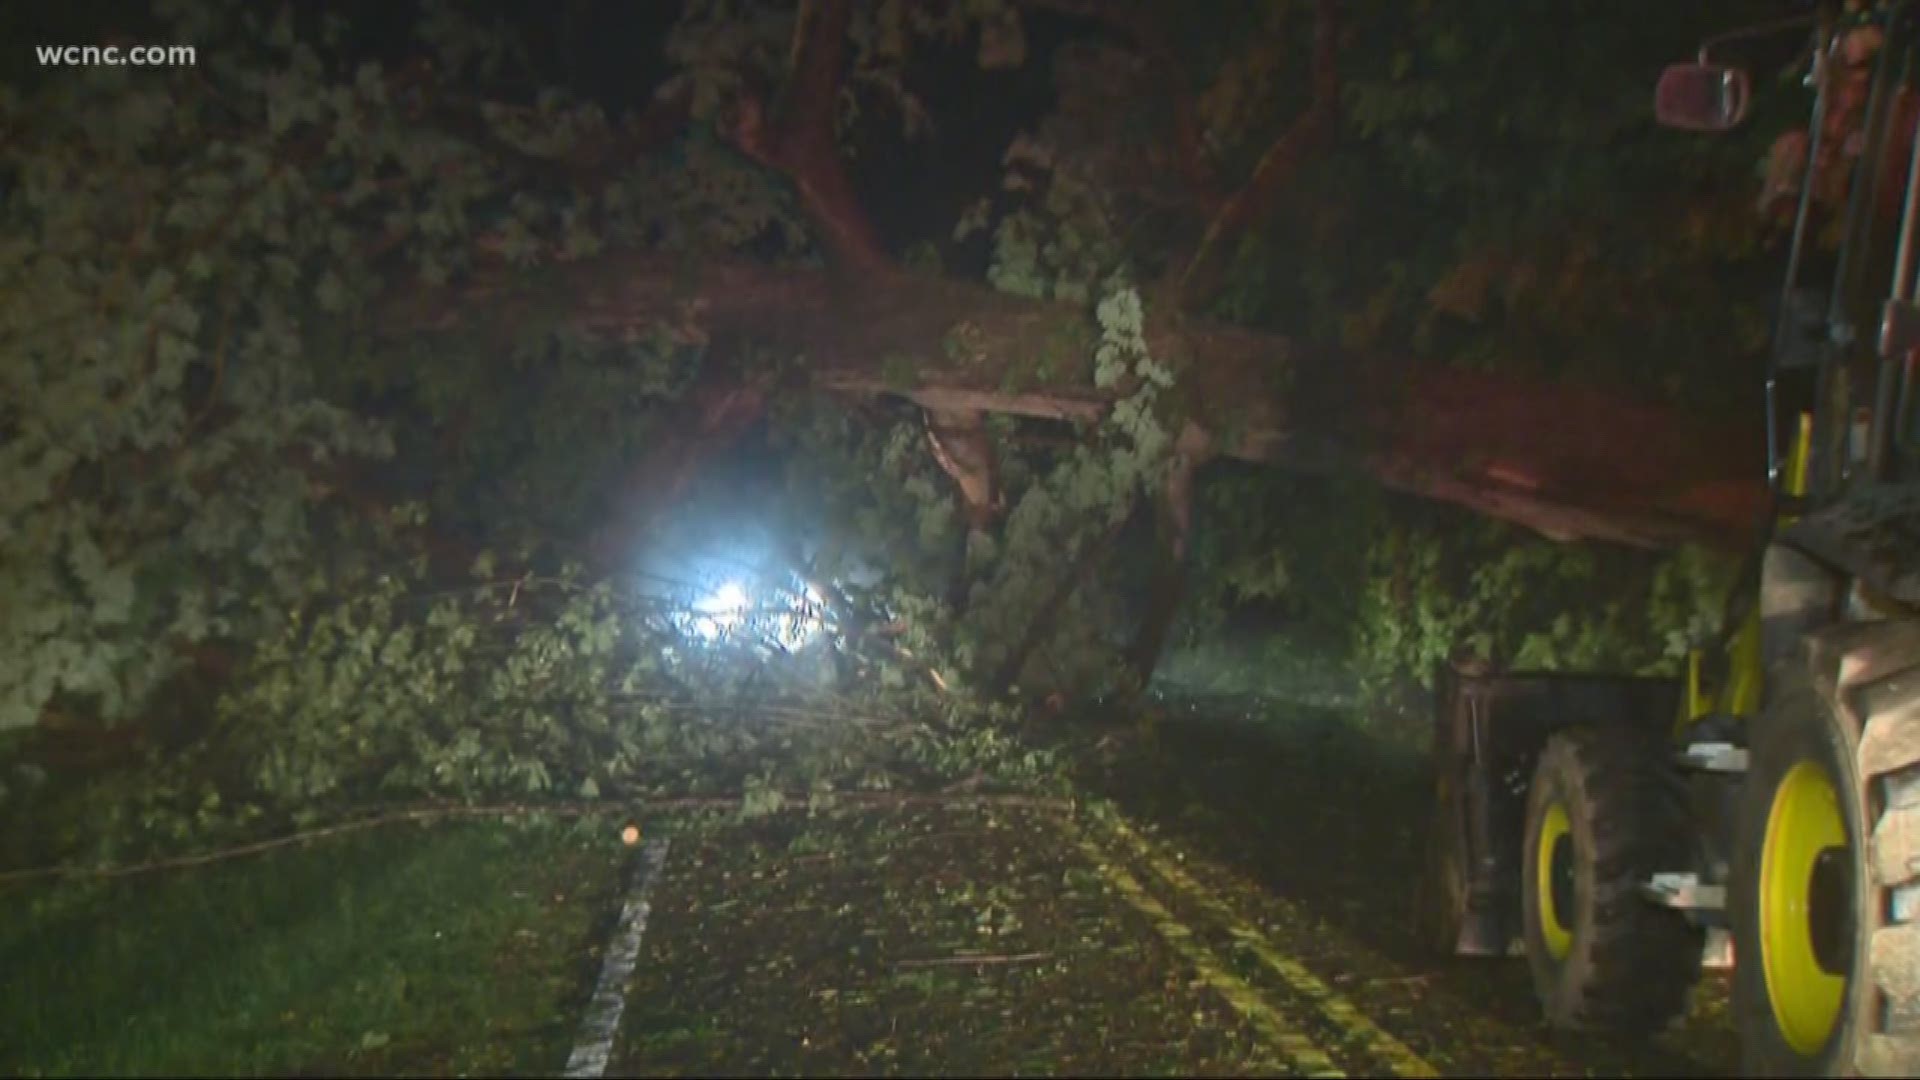 In addition to golf-ball-sized hail, there were downed trees caused by high winds